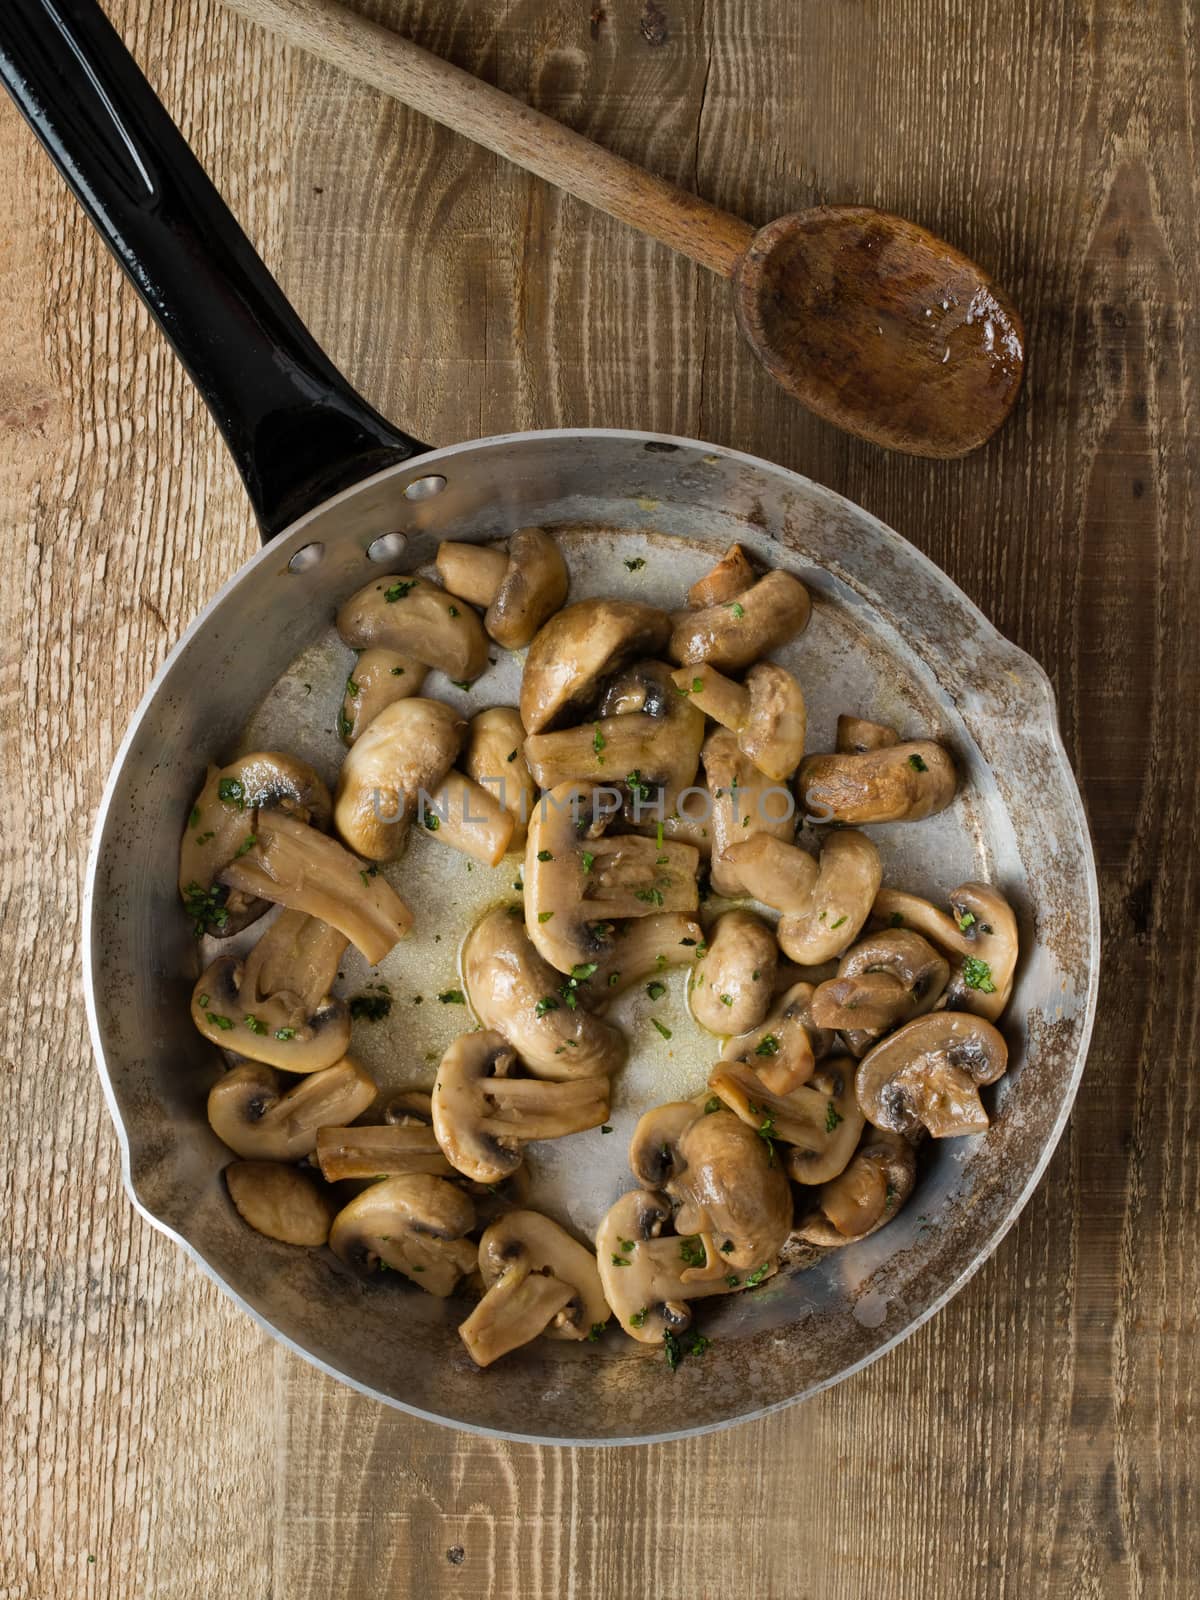 rustic sauteed mushrooms by zkruger